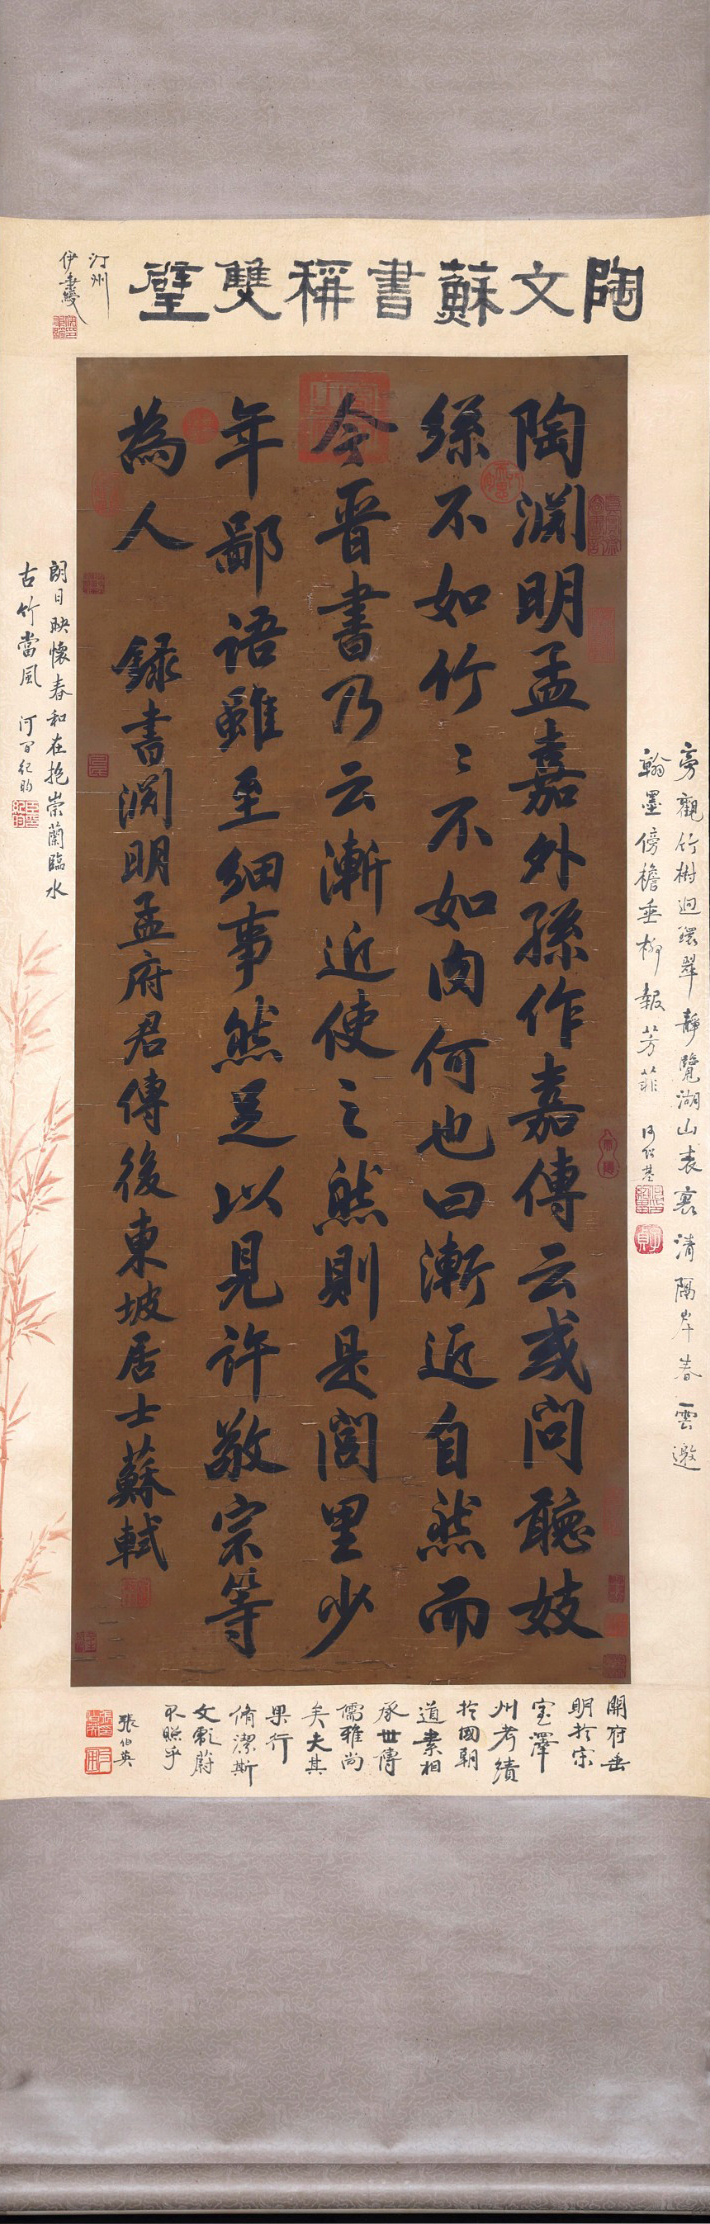 A Chinese Scroll Calligraphy By Su Shi - Image 9 of 13